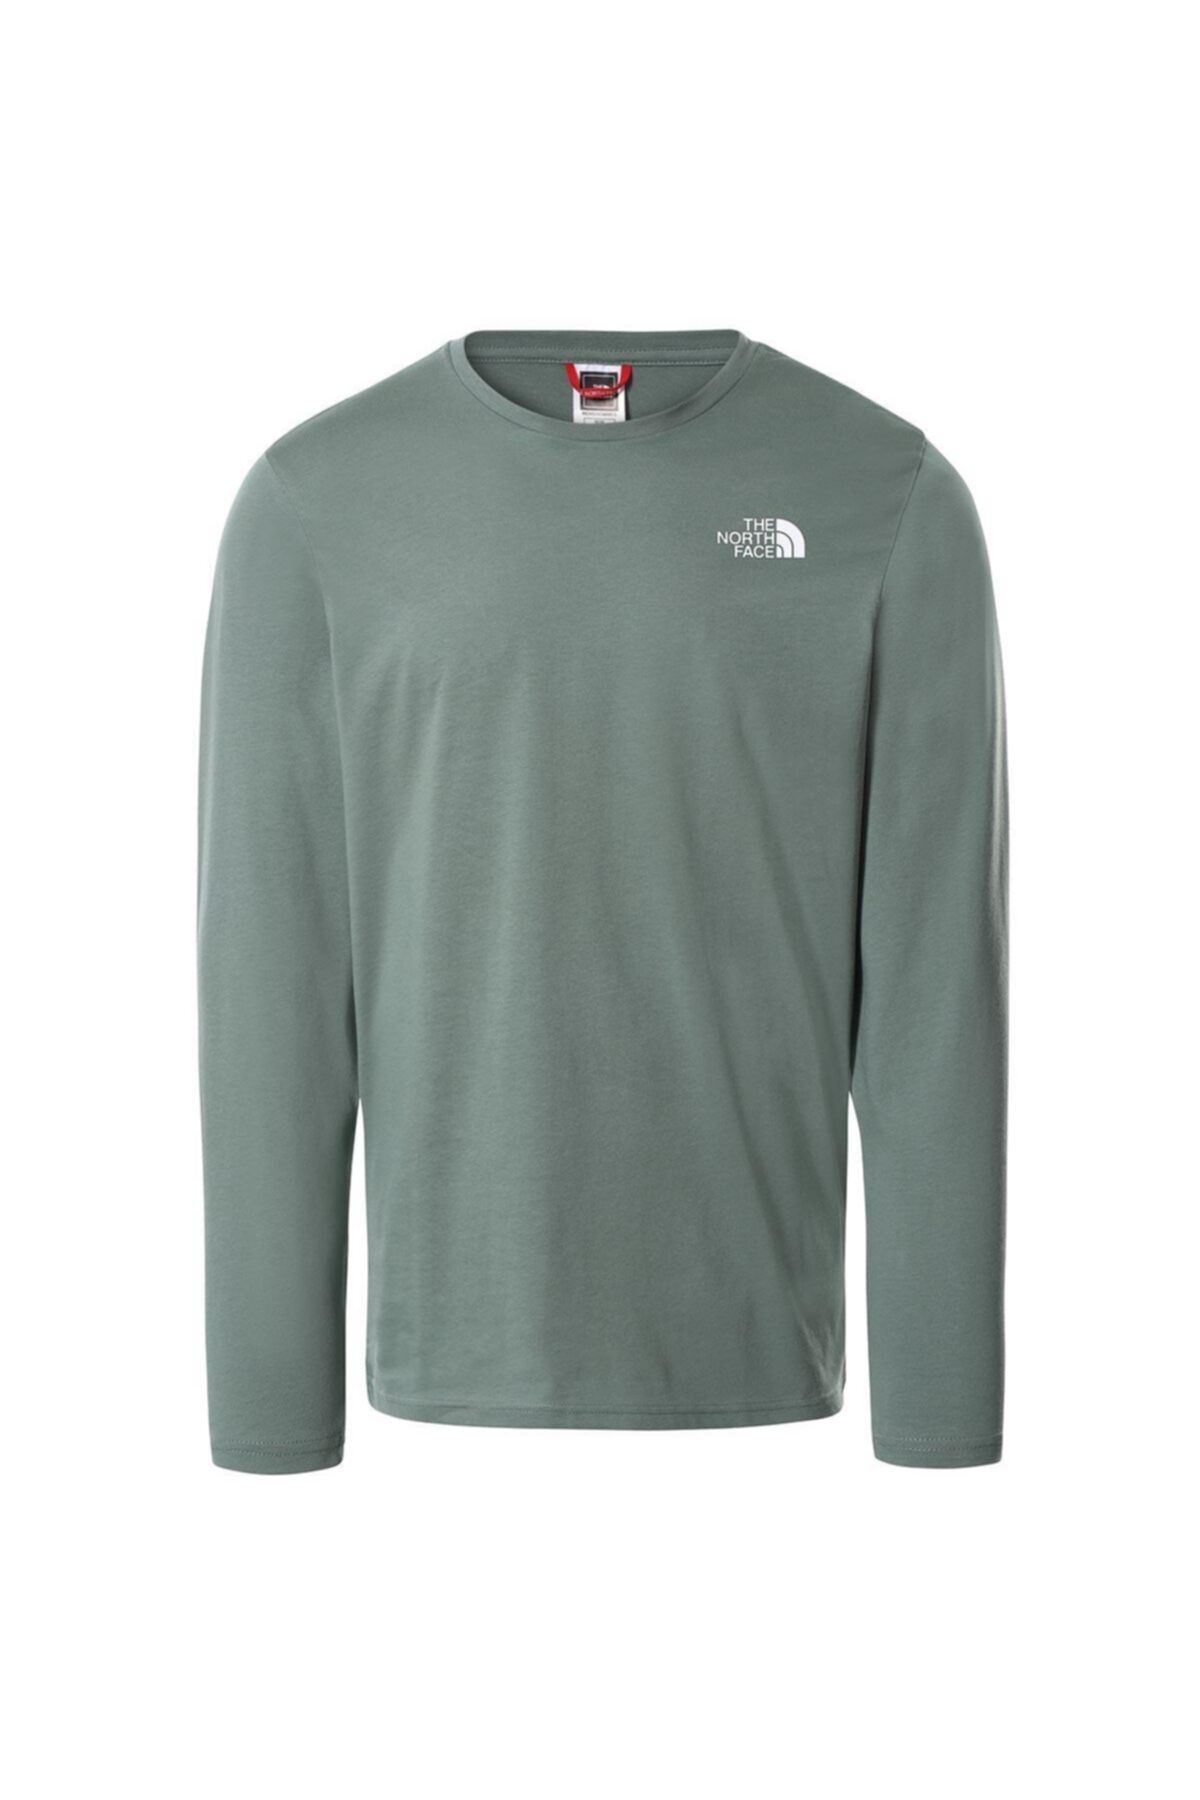 The North Face The Northface Erkek L/s Easy Tee Nf0a2tx1v1t1